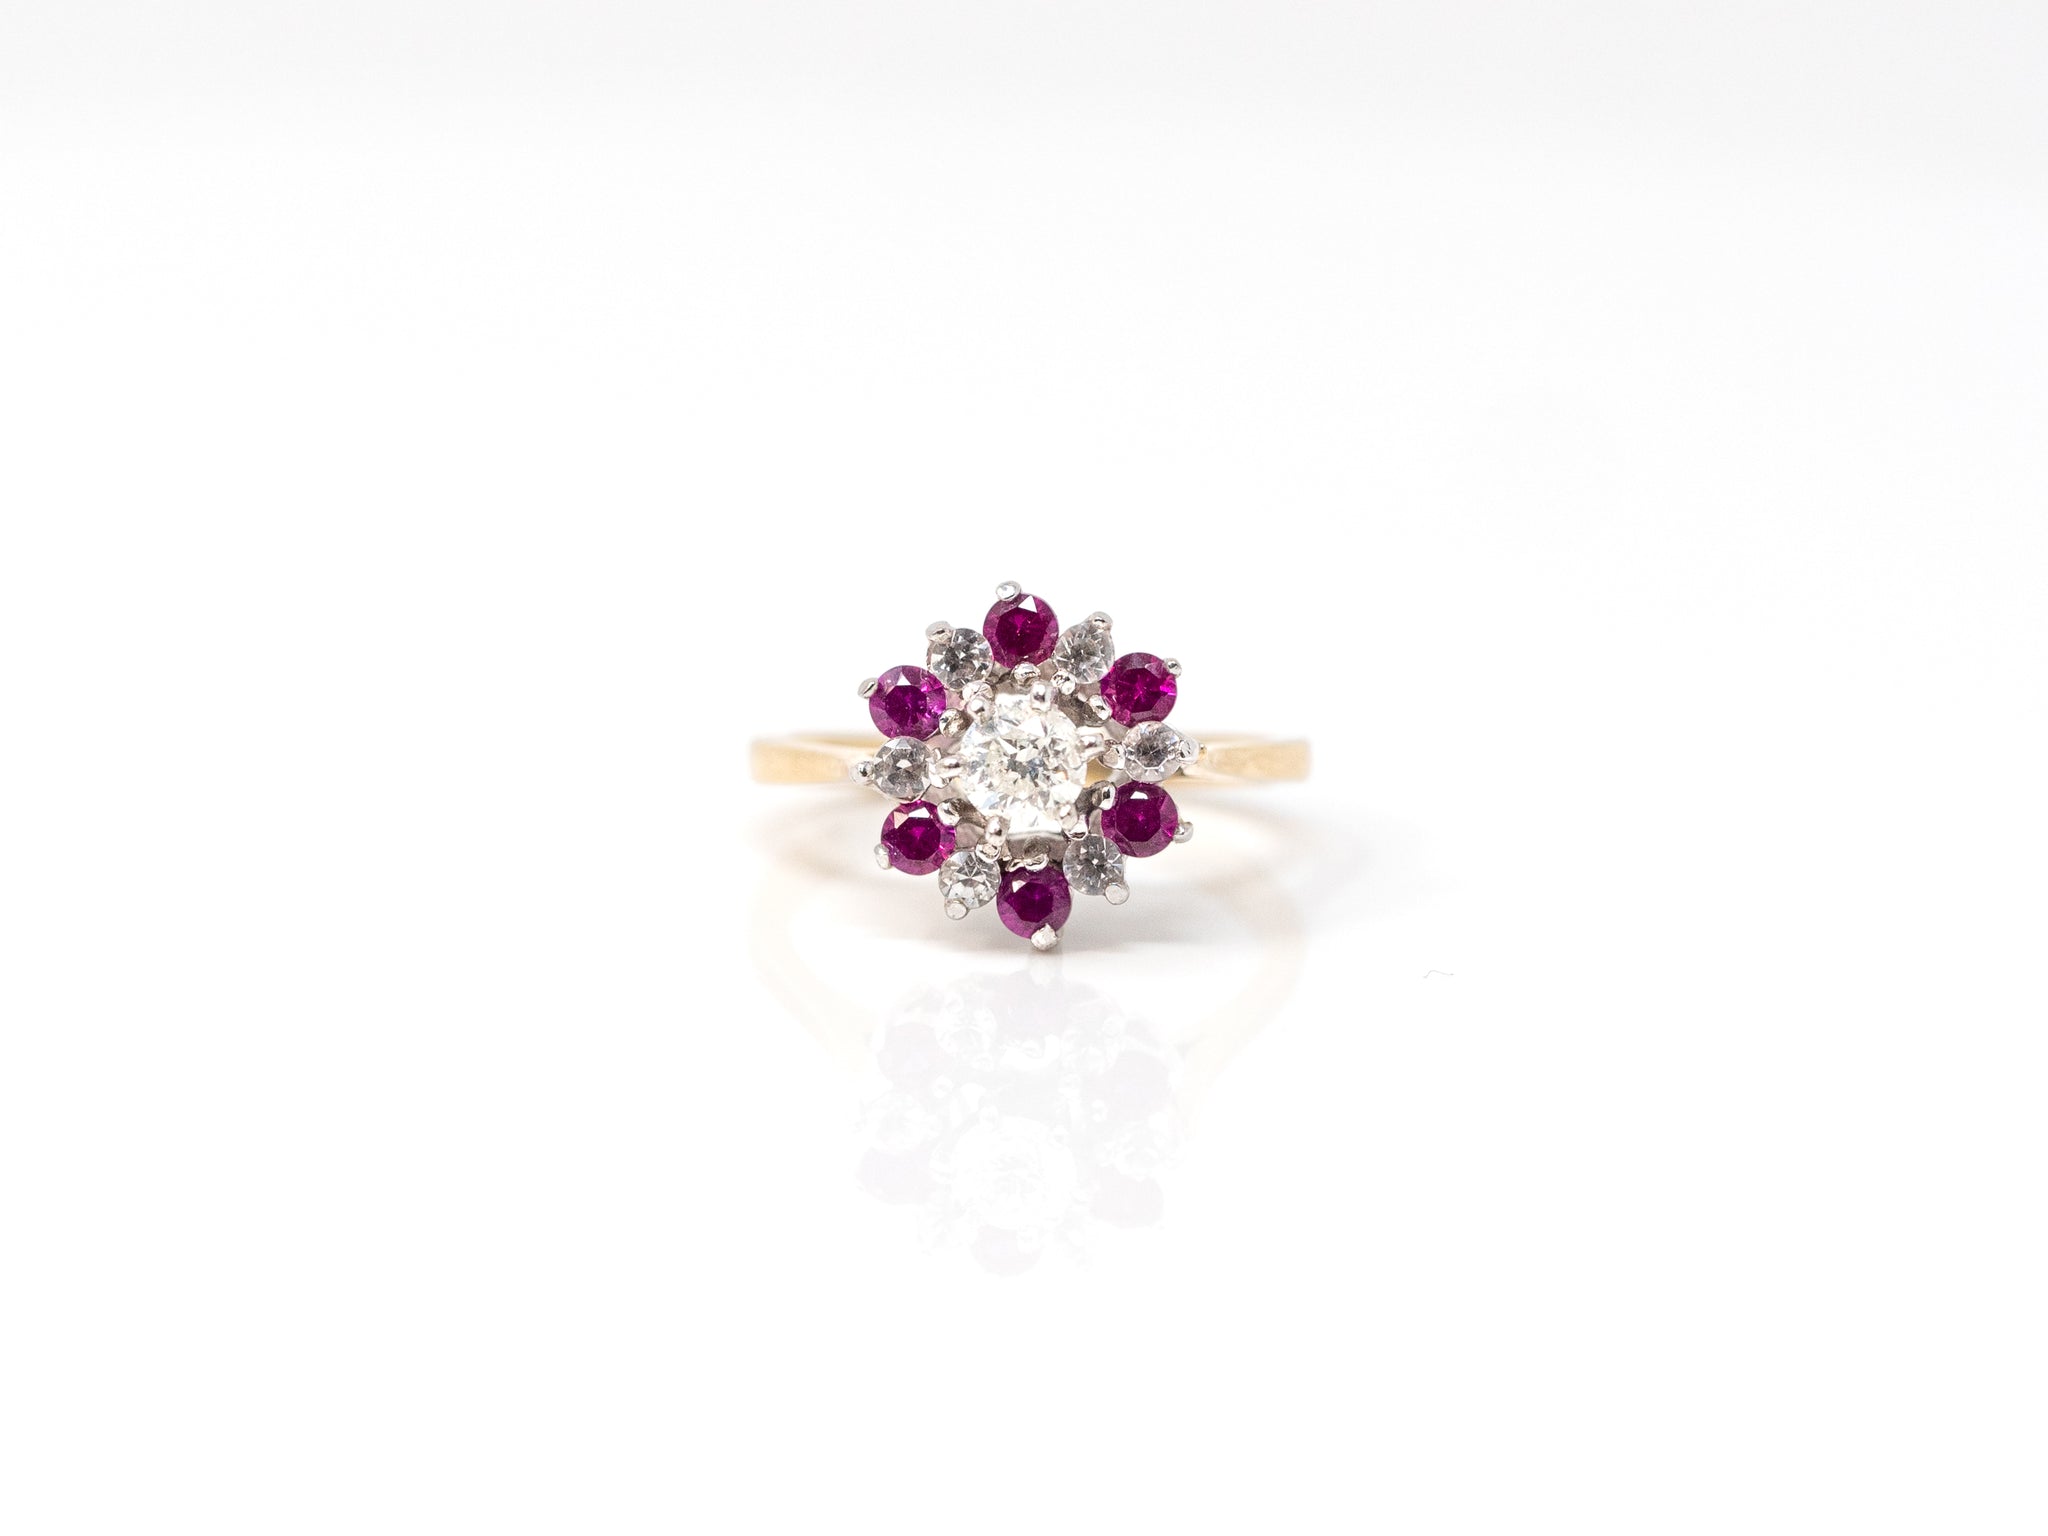 Natural Center 1/4 ct. Round Diamond with 0.2 ctw. Round Diamond & 0.4 ctw. Round Ruby Halo Cathedral Ring in 14K White and Yellow Gold at a Size 5 1/4